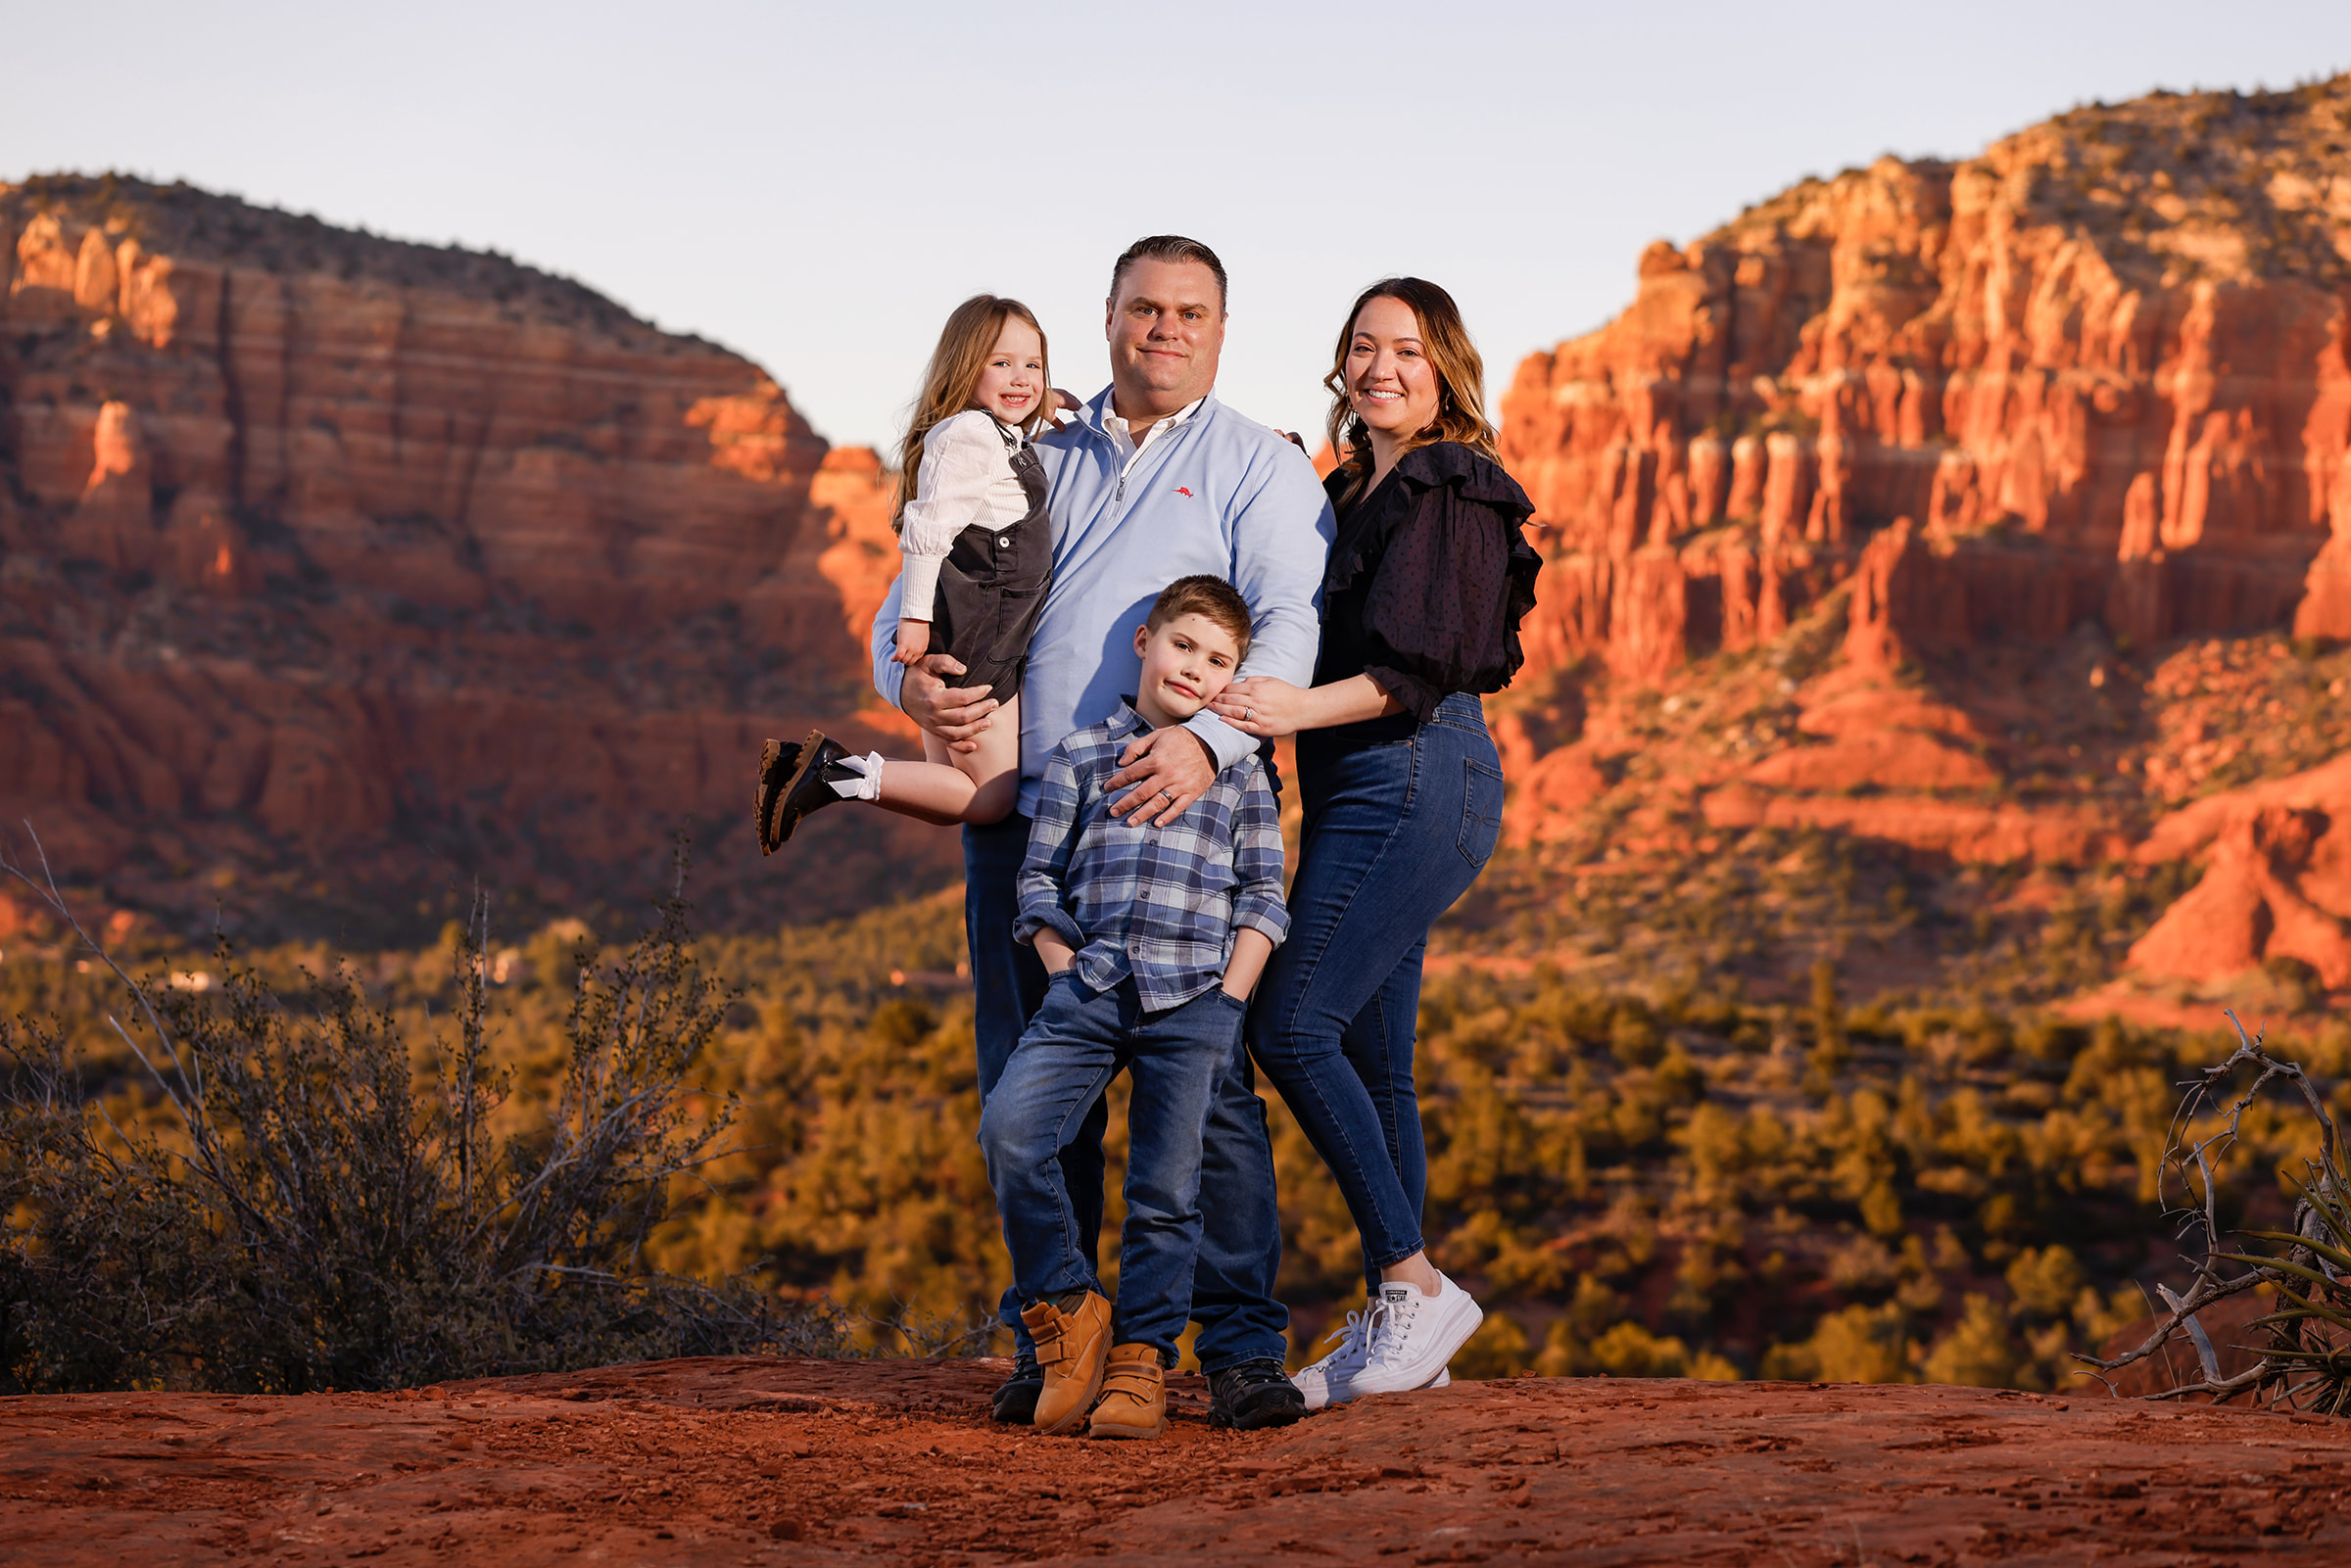 Sedona family portrait photographer, classic, fun, natural outdoor photo session in the red rocks of Arizona